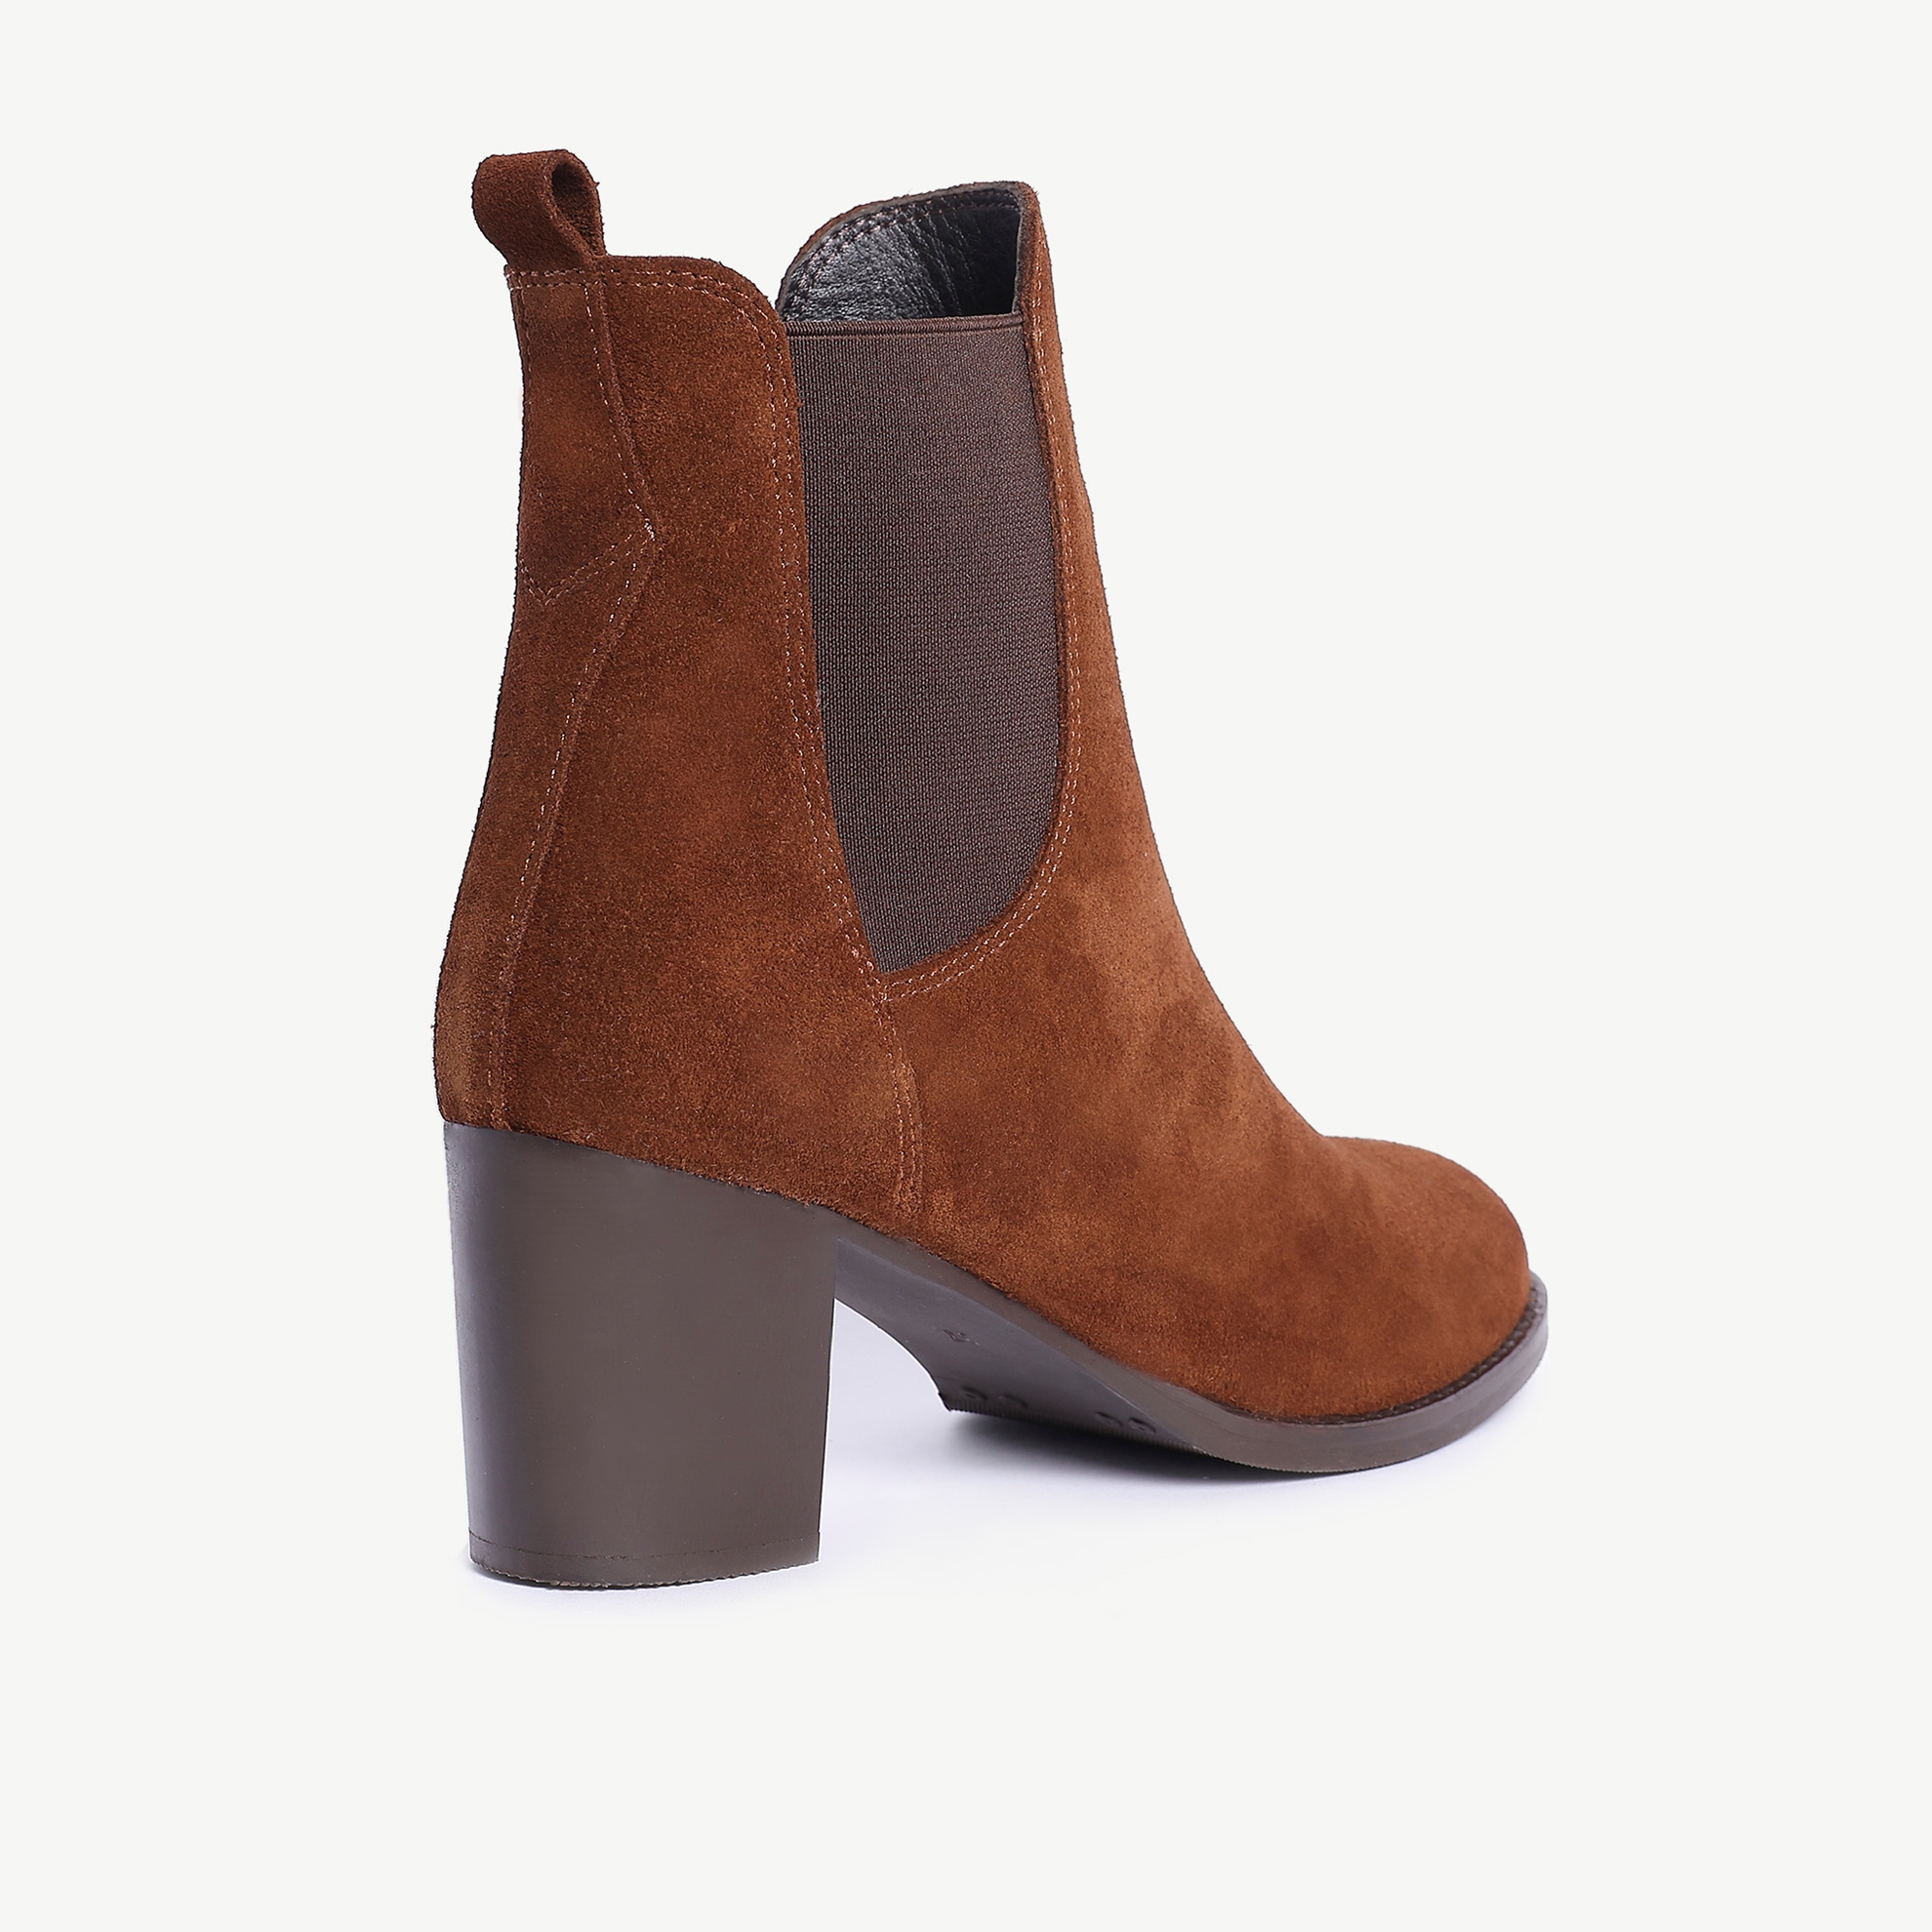 HigH-Heeled Suede Boots